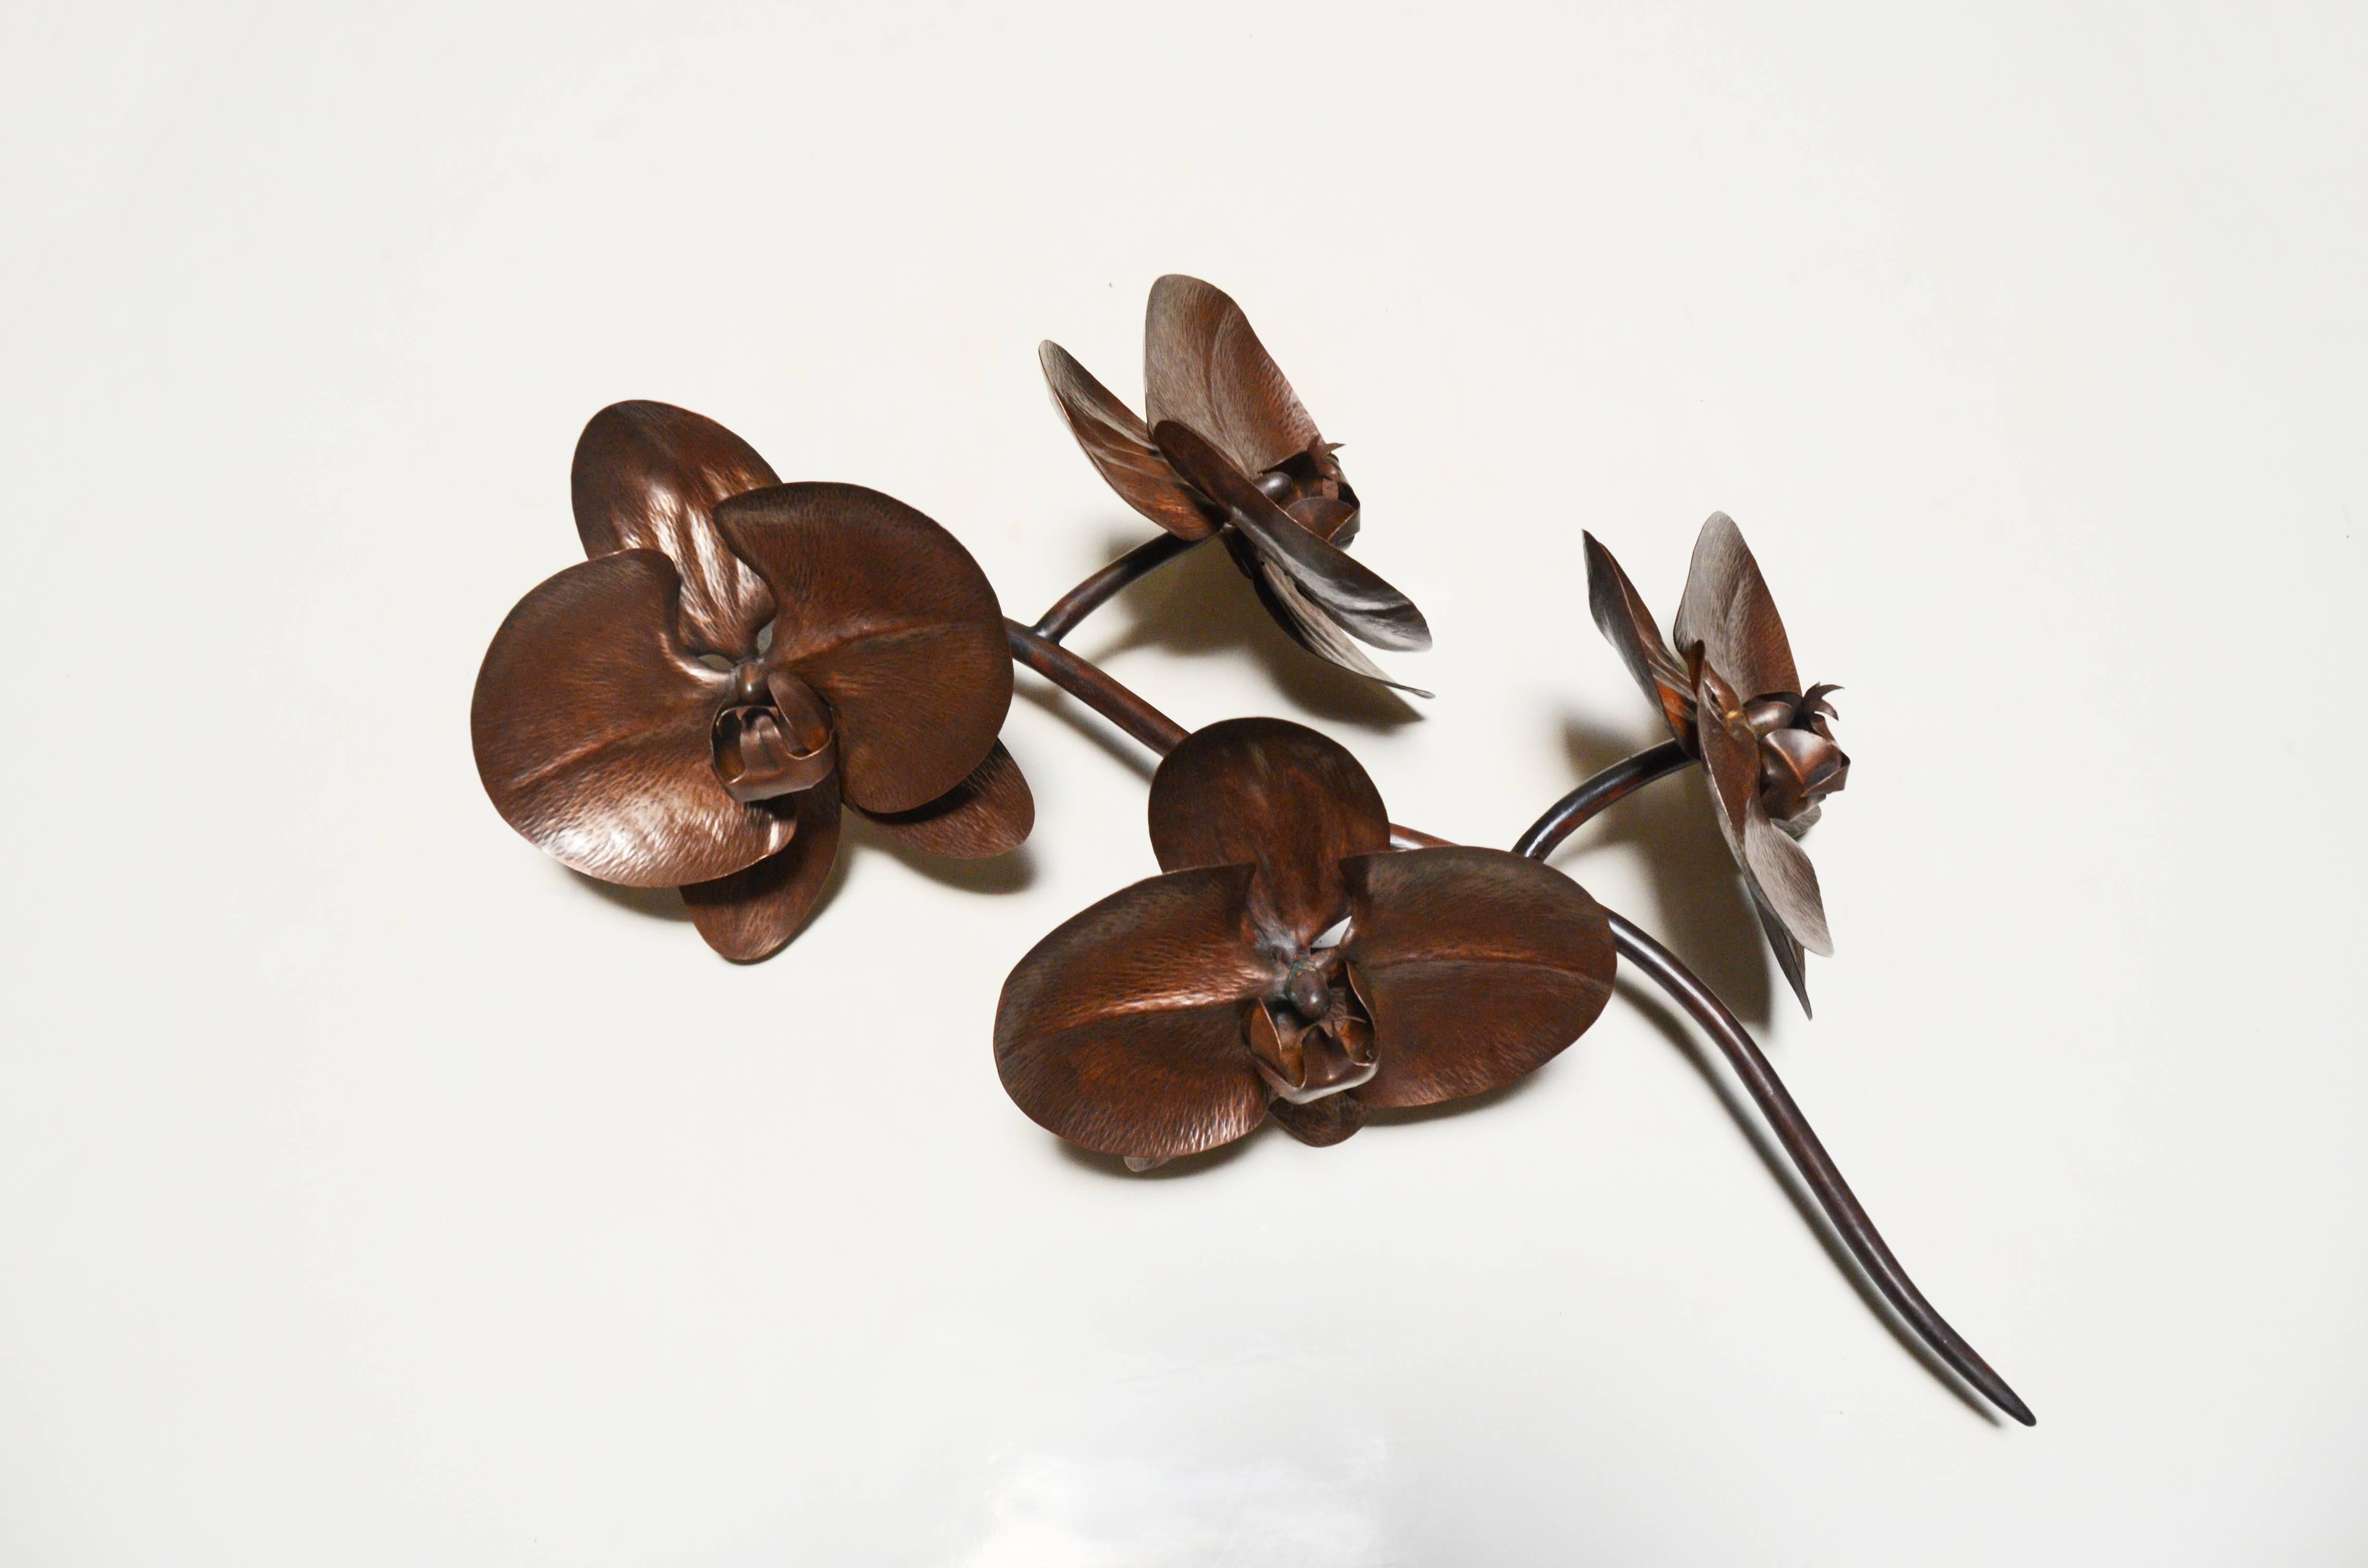 Contemporary Large Orchid Sculpture by Robert Kuo, Hand Repoussé Copper, Limited Edition